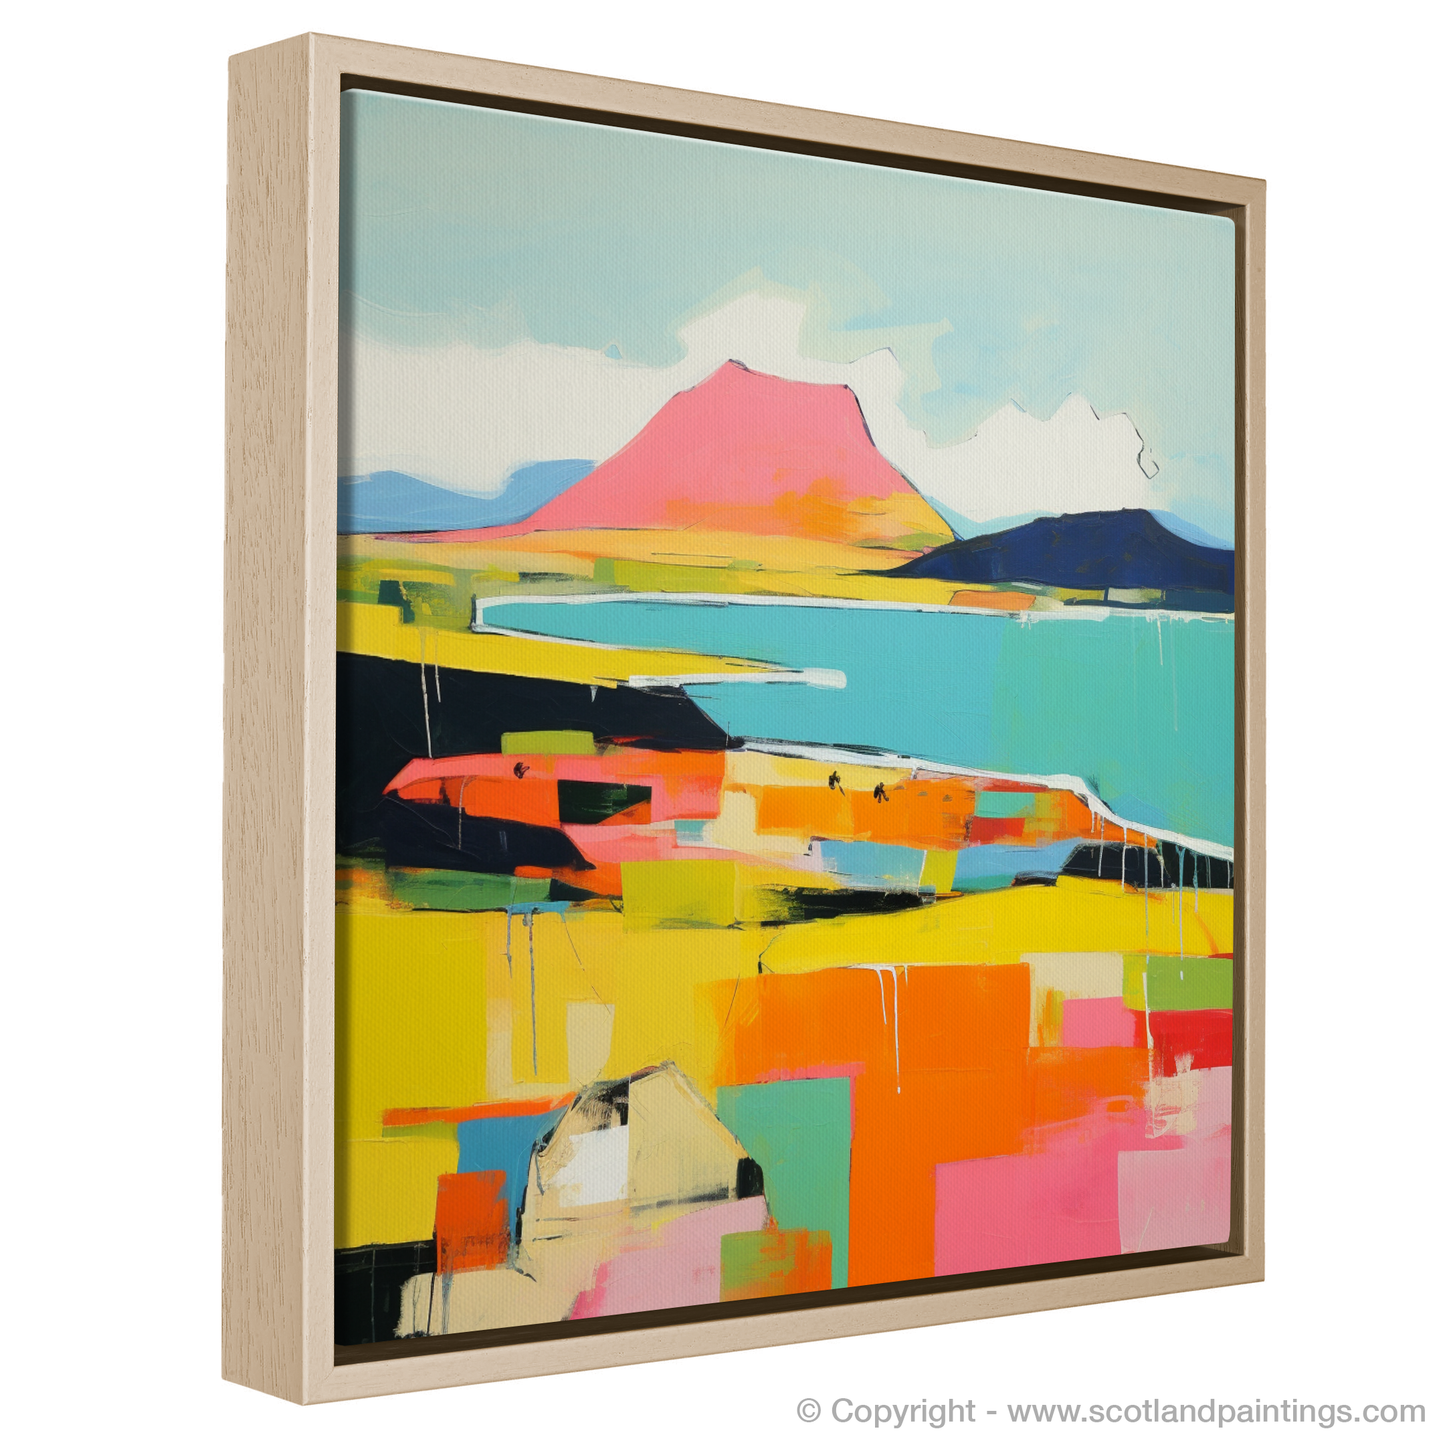 Painting and Art Print of Isle of Arran, Firth of Clyde in summer entitled "Summer Essence of Arran and Clyde".